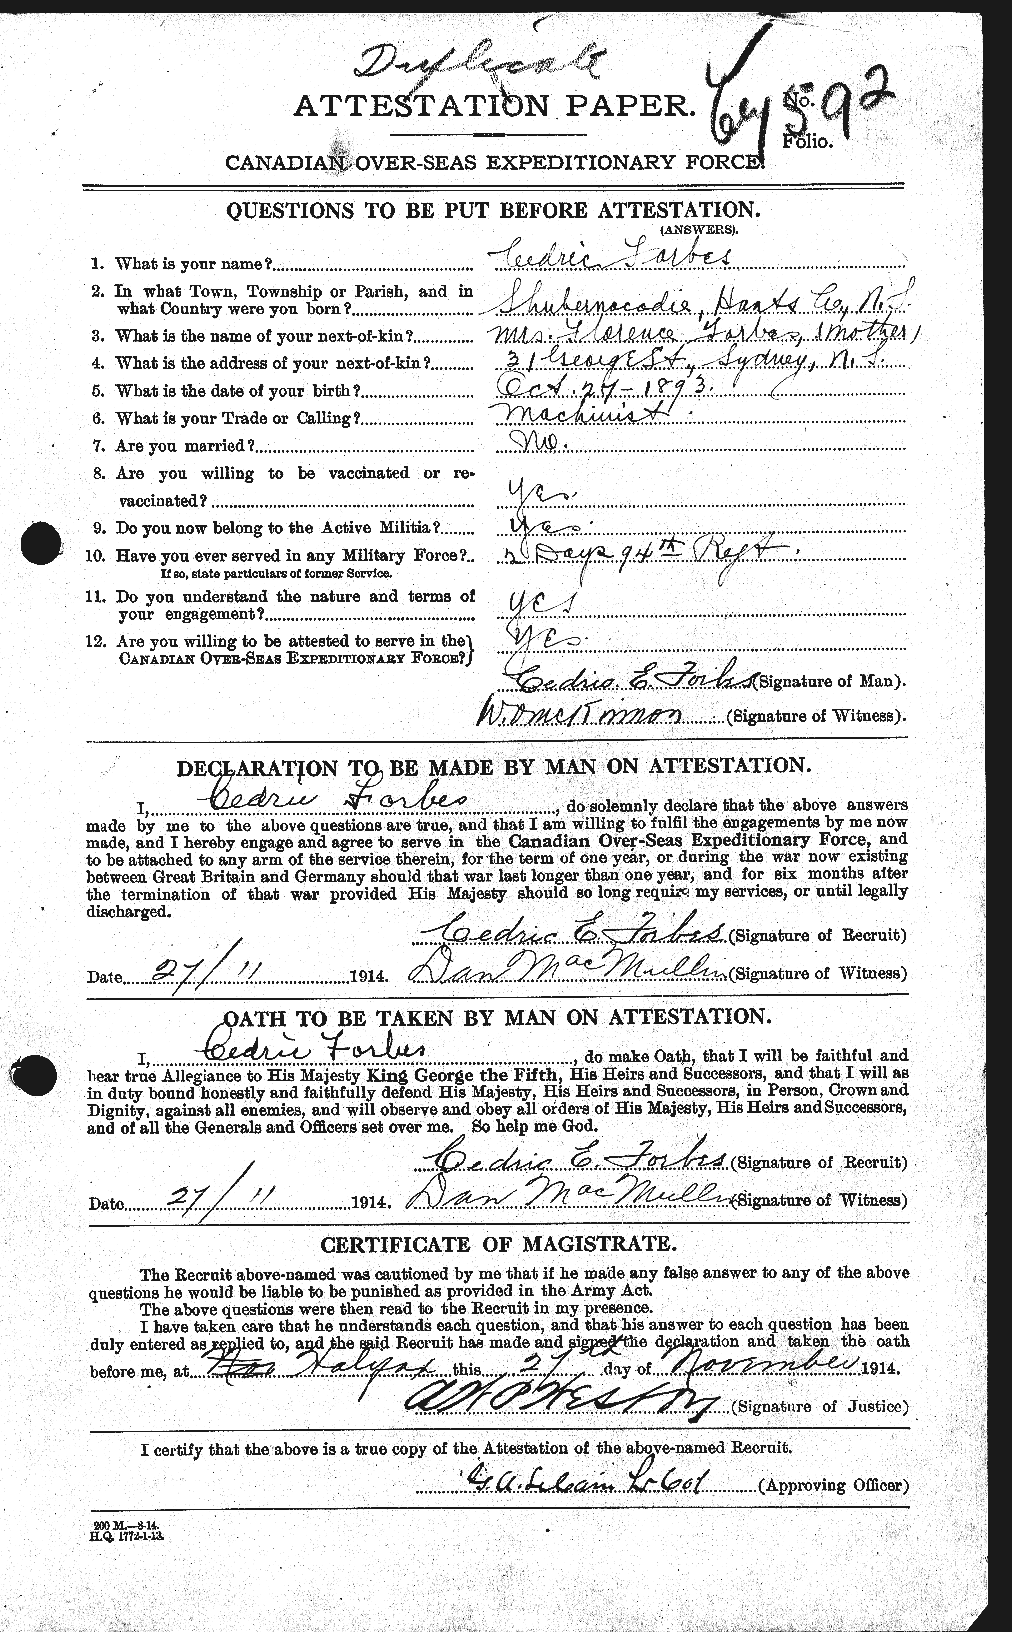 Personnel Records of the First World War - CEF 329939a